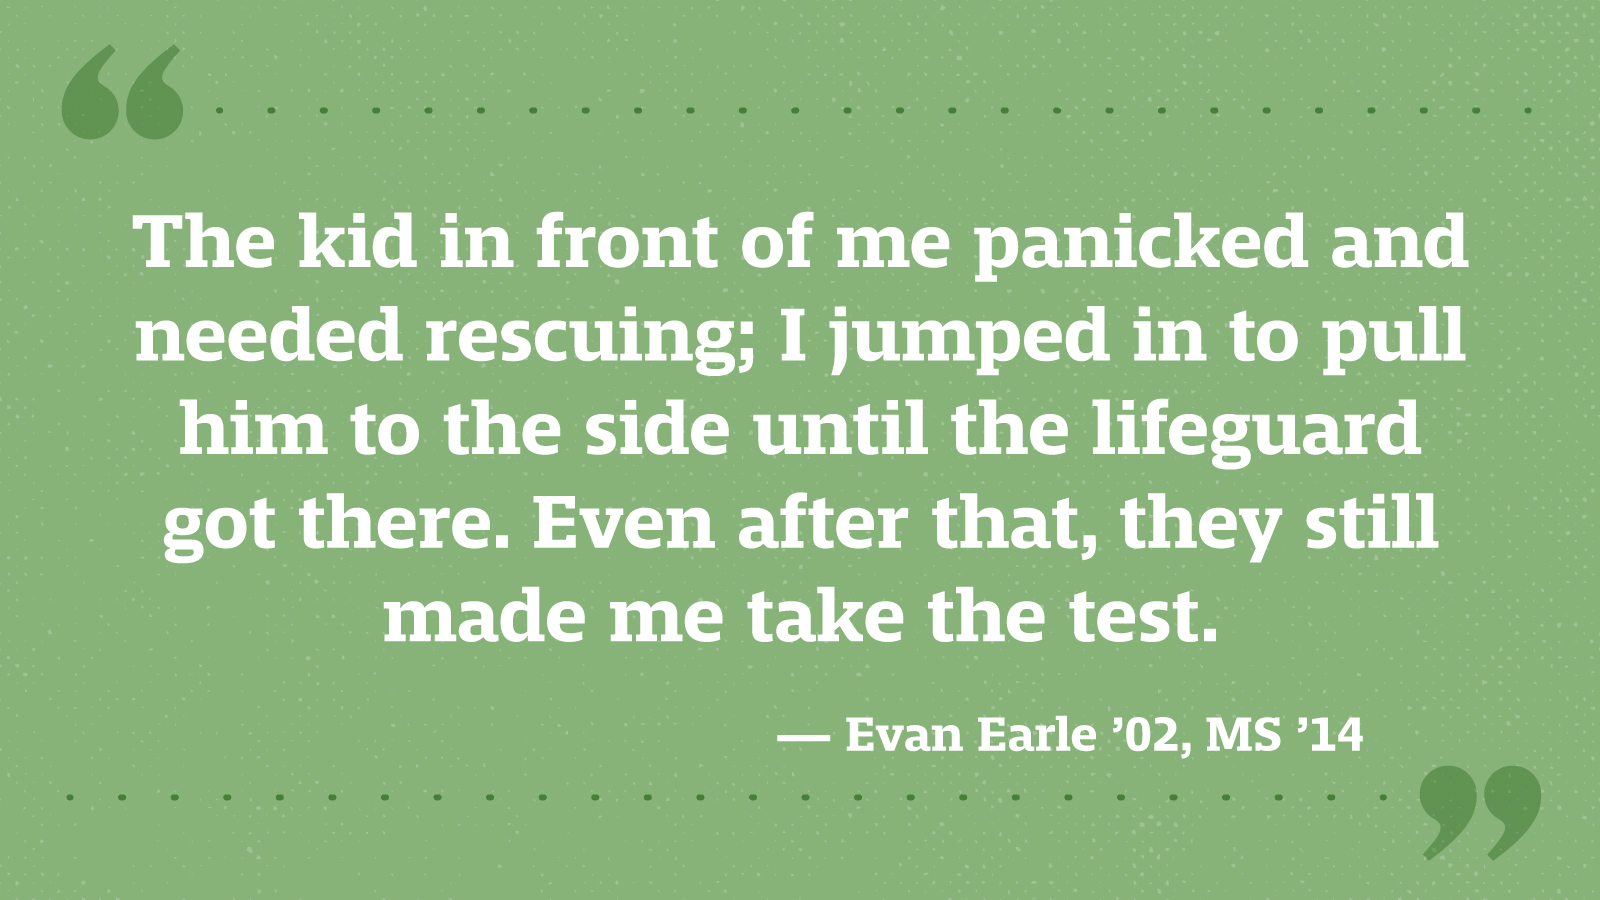 The kid in front of me panicked and needed rescuing; I jumped in to pull him to the side until the lifeguard got there. Even after that, they still made me take the test. — Evan Earle ’02, MS ’14